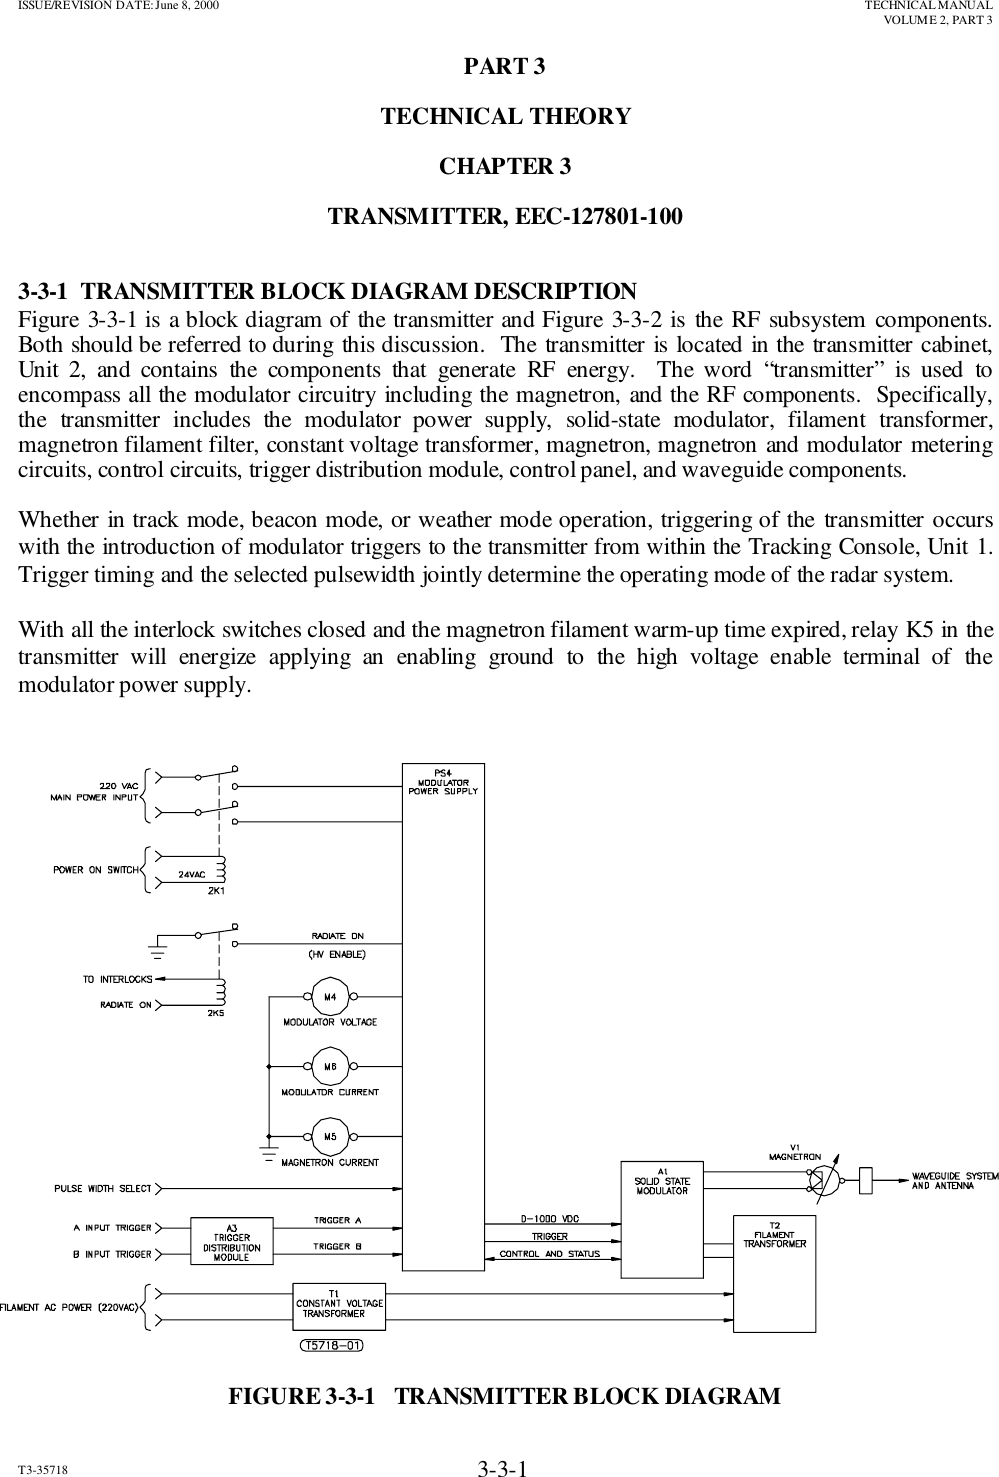 ISSUE/REVISION DATE: June 8, 2000 TECHNICAL MANUALVOLUME 2, PART 3T3-35718 3-3-1PART 3TECHNICAL THEORYCHAPTER 3TRANSMITTER, EEC-127801-1003-3-1  TRANSMITTER BLOCK DIAGRAM DESCRIPTIONFigure 3-3-1 is a block diagram of the transmitter and Figure 3-3-2 is the RF subsystem components.Both should be referred to during this discussion.  The transmitter is located in the transmitter cabinet,Unit 2, and contains the components that generate RF energy.  The word “transmitter” is used toencompass all the modulator circuitry including the magnetron, and the RF components.  Specifically,the transmitter includes the modulator power supply, solid-state modulator, filament transformer,magnetron filament filter, constant voltage transformer, magnetron, magnetron and modulator meteringcircuits, control circuits, trigger distribution module, control panel, and waveguide components.Whether in track mode, beacon mode, or weather mode operation, triggering of the transmitter occurswith the introduction of modulator triggers to the transmitter from within the Tracking Console, Unit 1.Trigger timing and the selected pulsewidth jointly determine the operating mode of the radar system.With all the interlock switches closed and the magnetron filament warm-up time expired, relay K5 in thetransmitter will energize applying an enabling ground to the high voltage enable terminal of themodulator power supply.FIGURE 3-3-1   TRANSMITTER BLOCK DIAGRAM